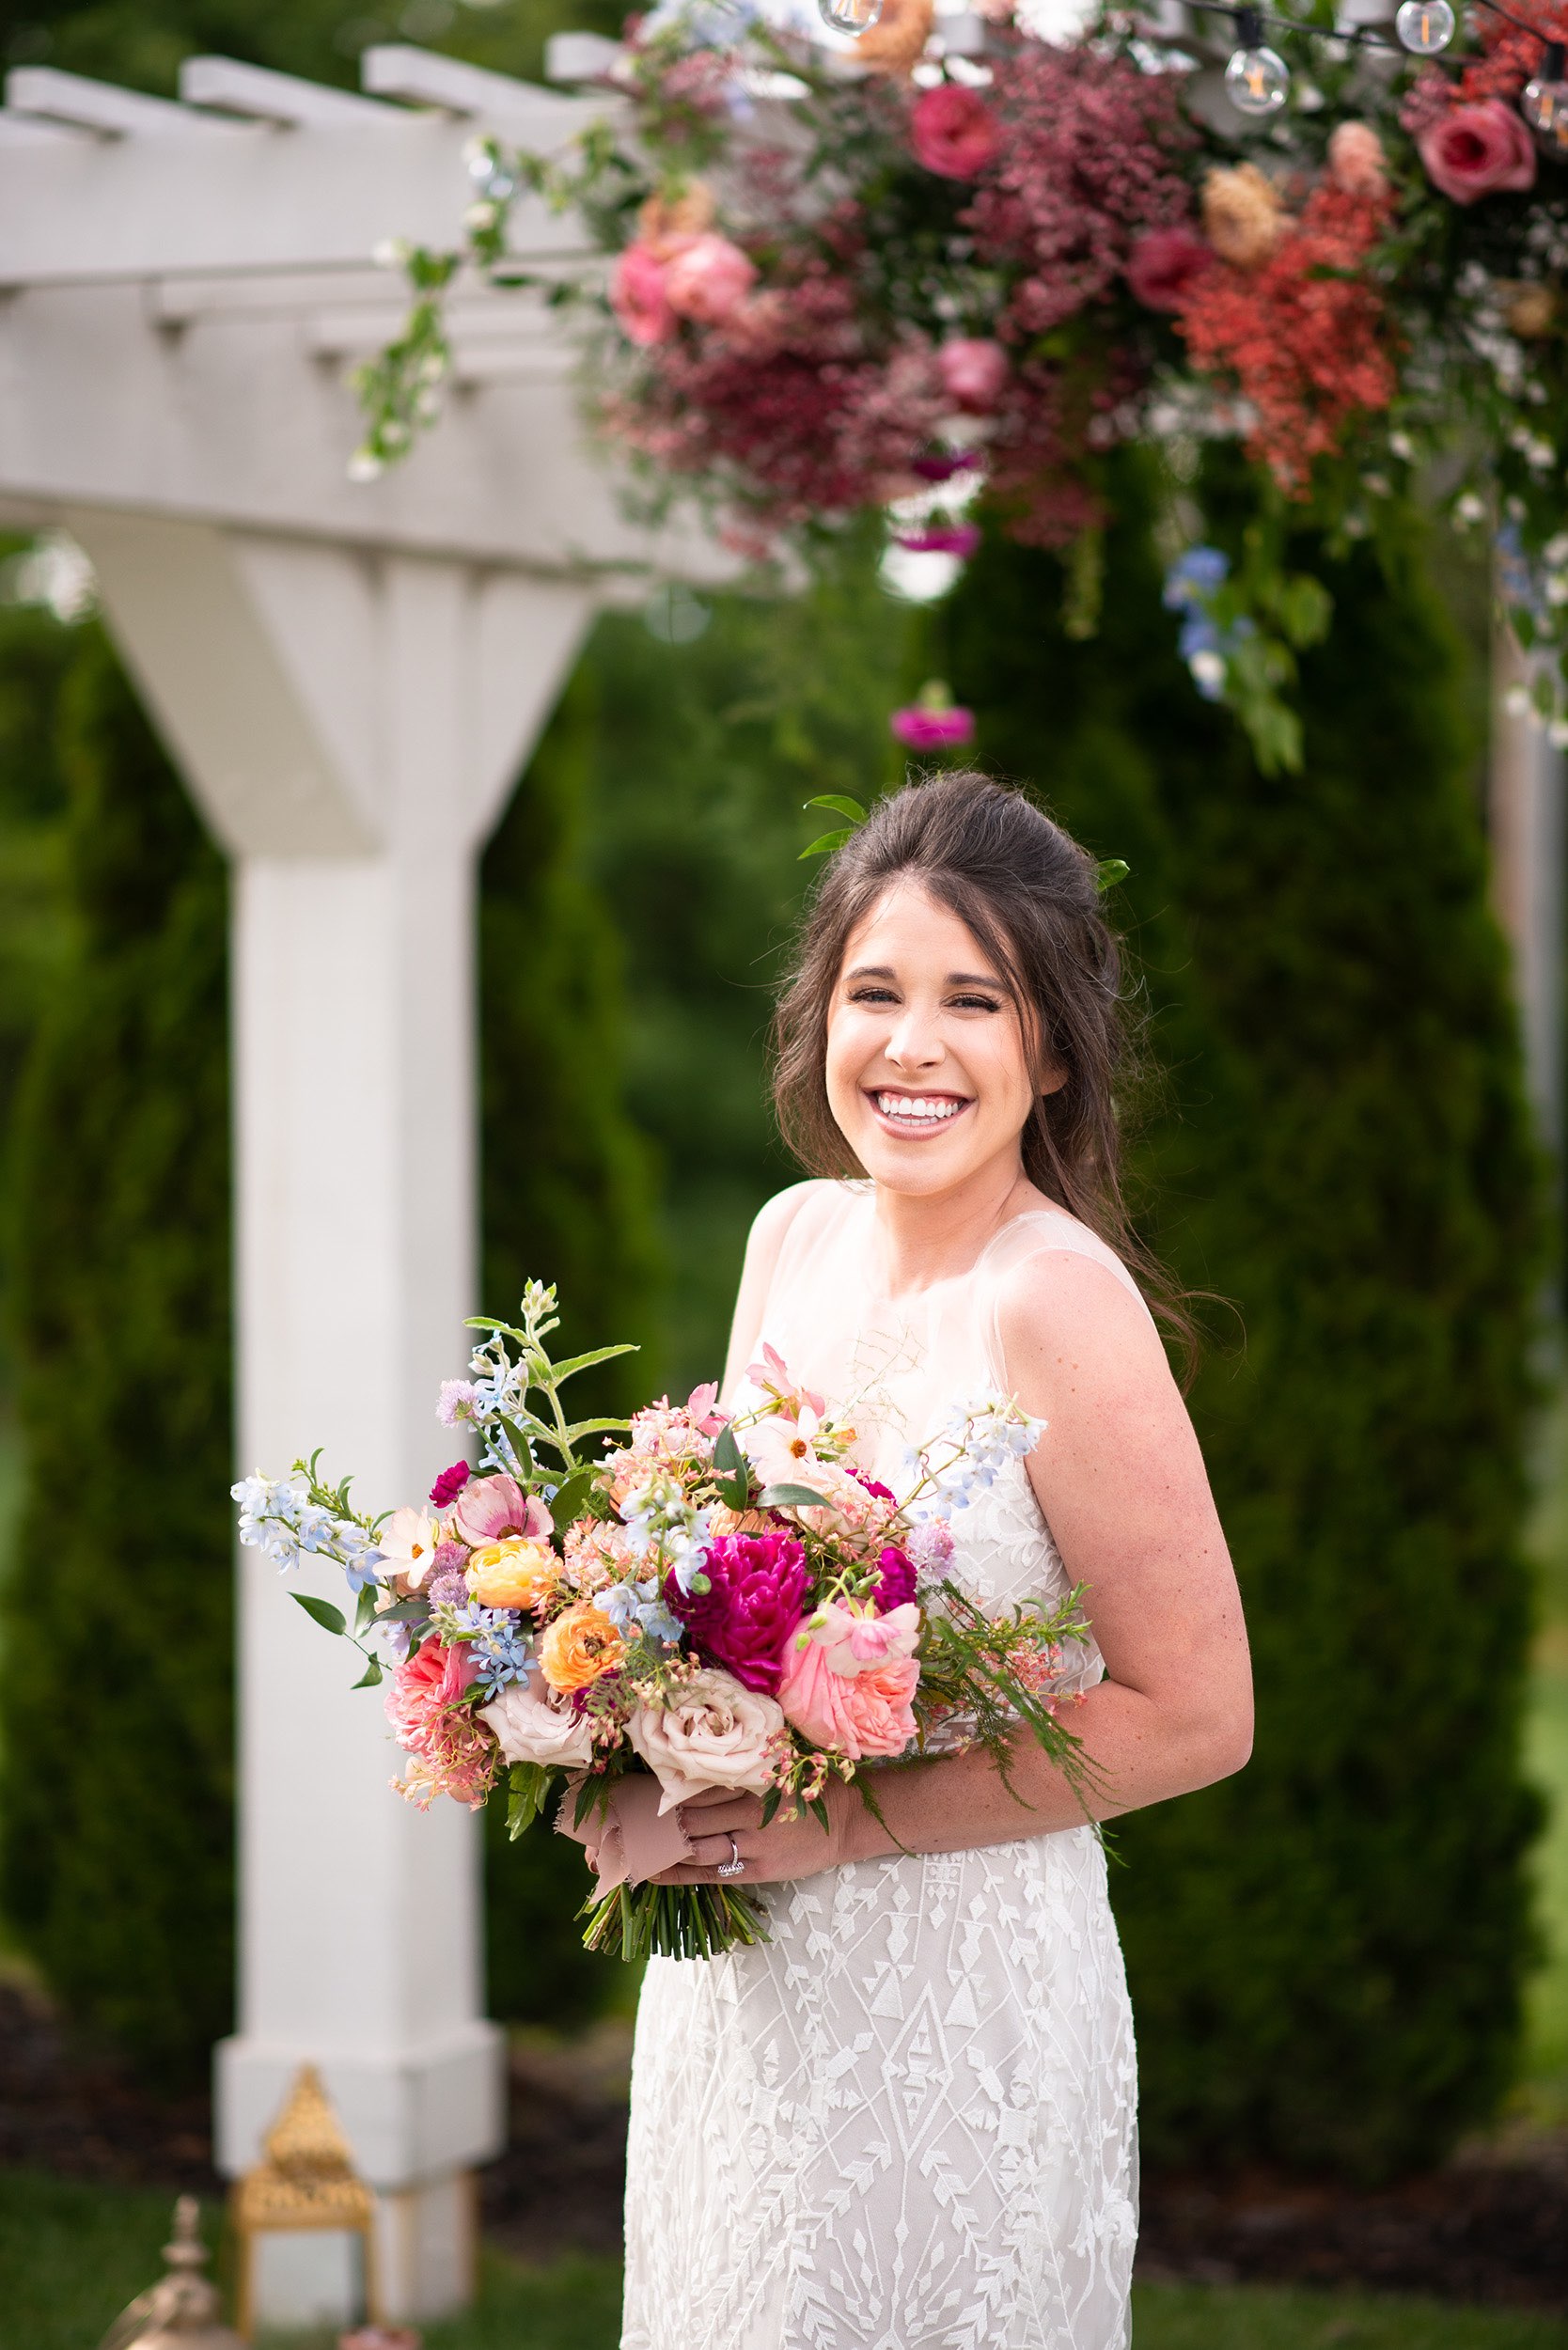 Smiling bride with colorful bouquet.